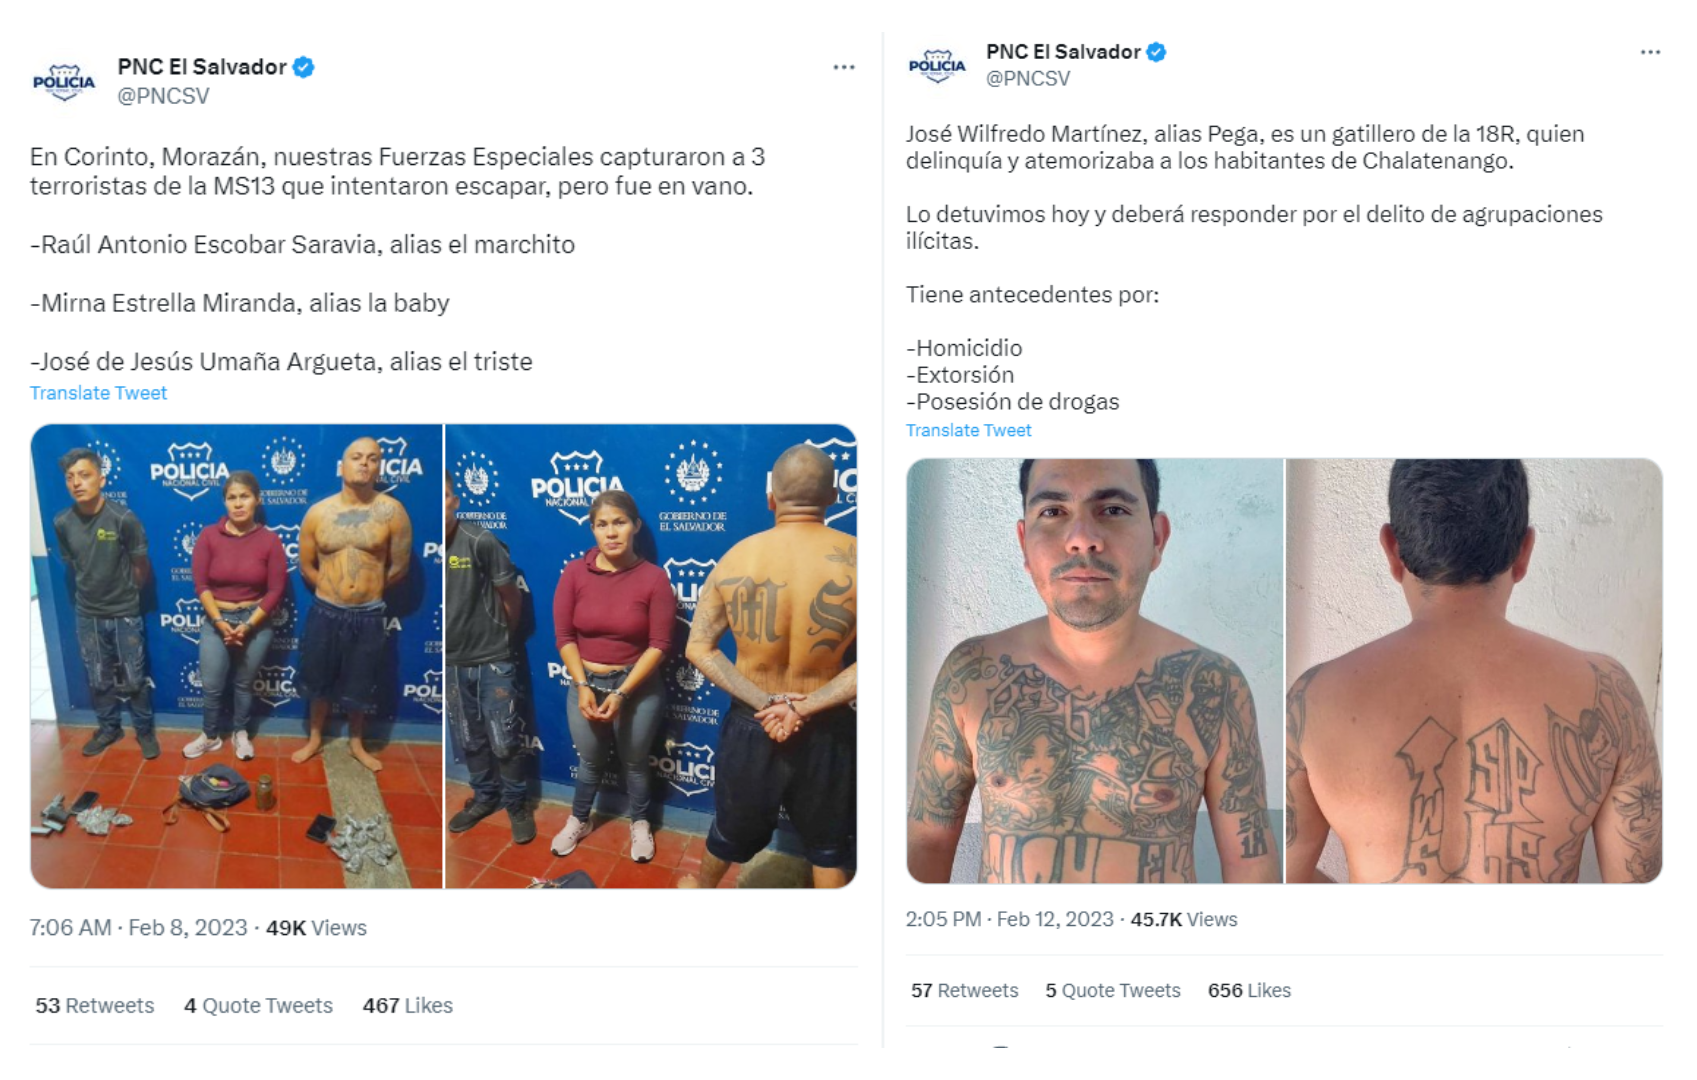 Tweets from National Police Force's official account showing recent arrests for suspected gang activity. The tweet dated Feb. 8, 2023 shows three such detainees, and the tweet dated Feb. 12, 2023 prominently features the detainee's tattoos. 